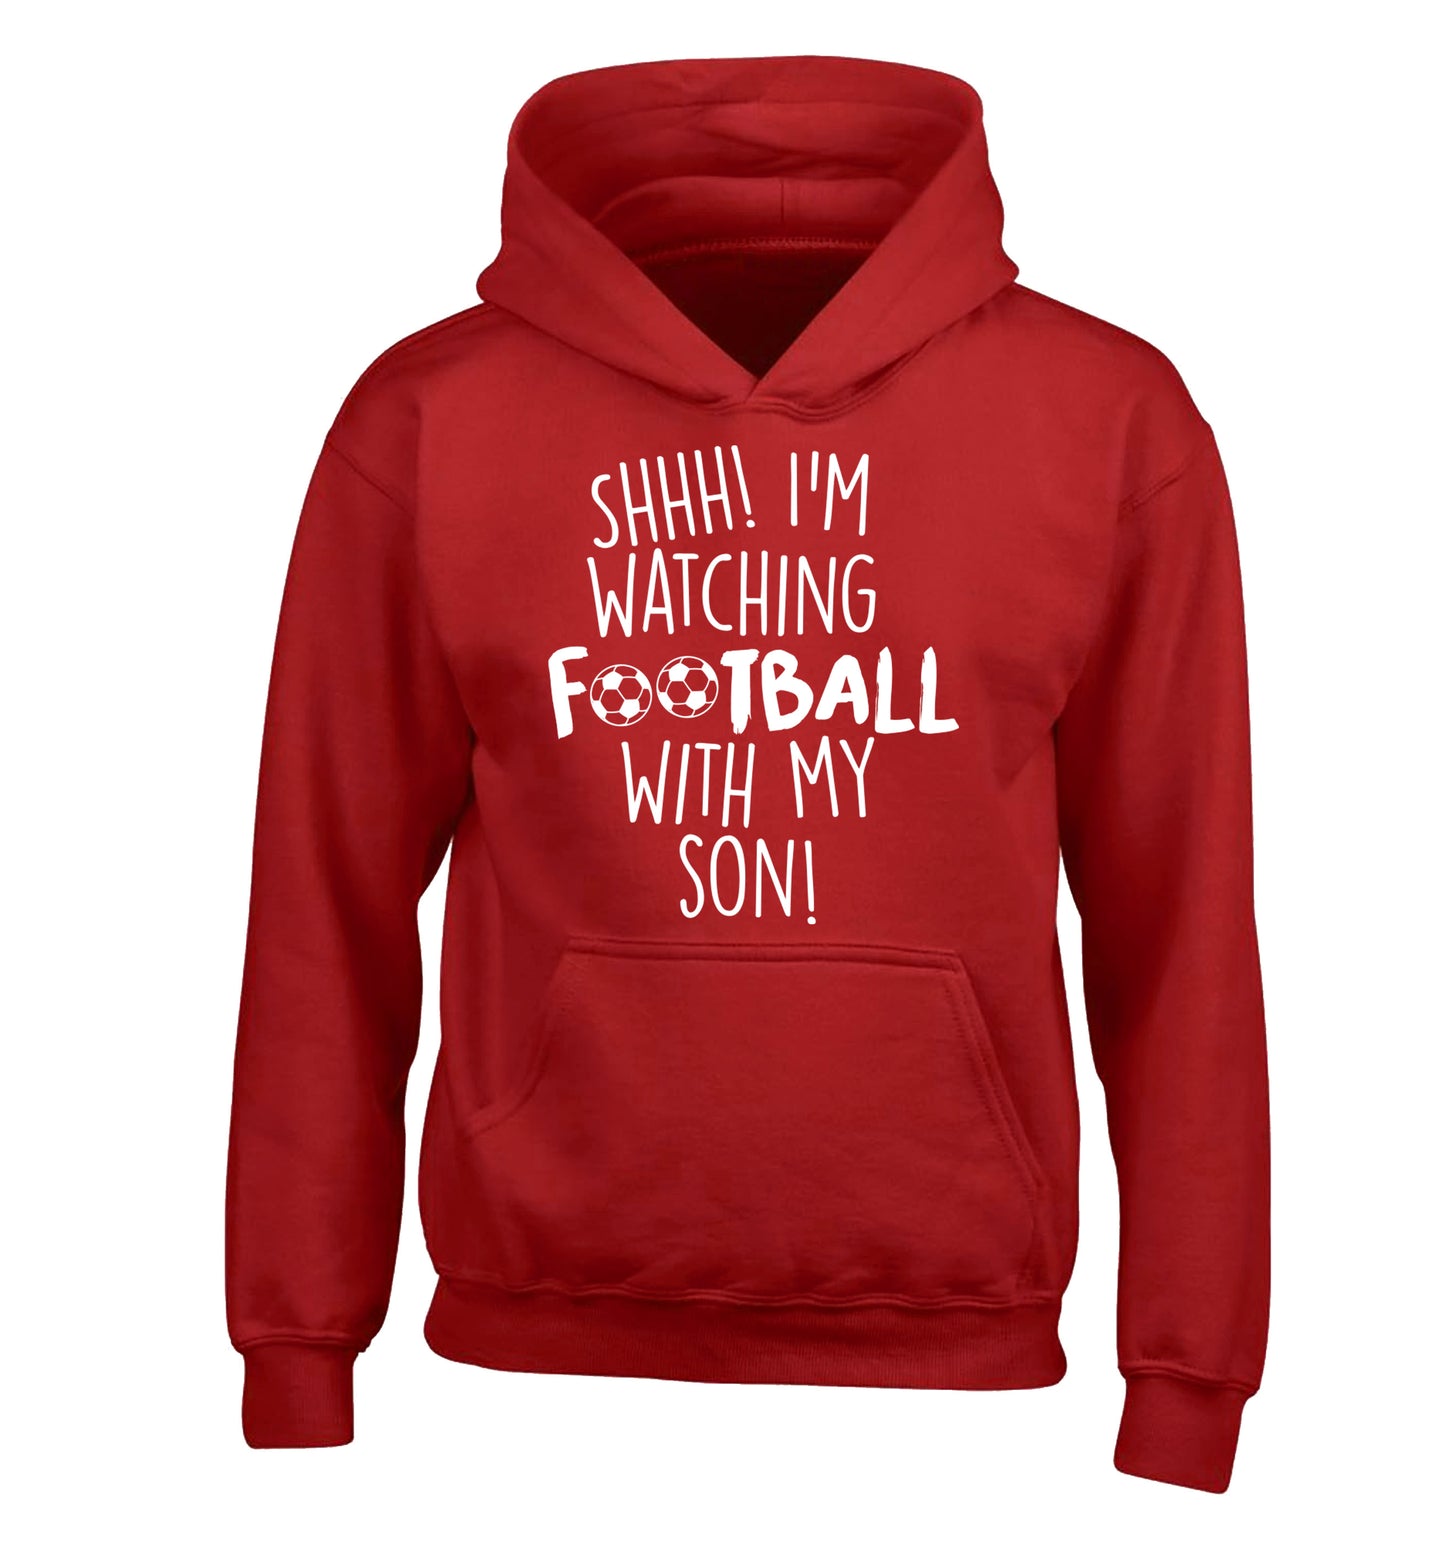 Shhh I'm watching football with my son children's red hoodie 12-14 Years